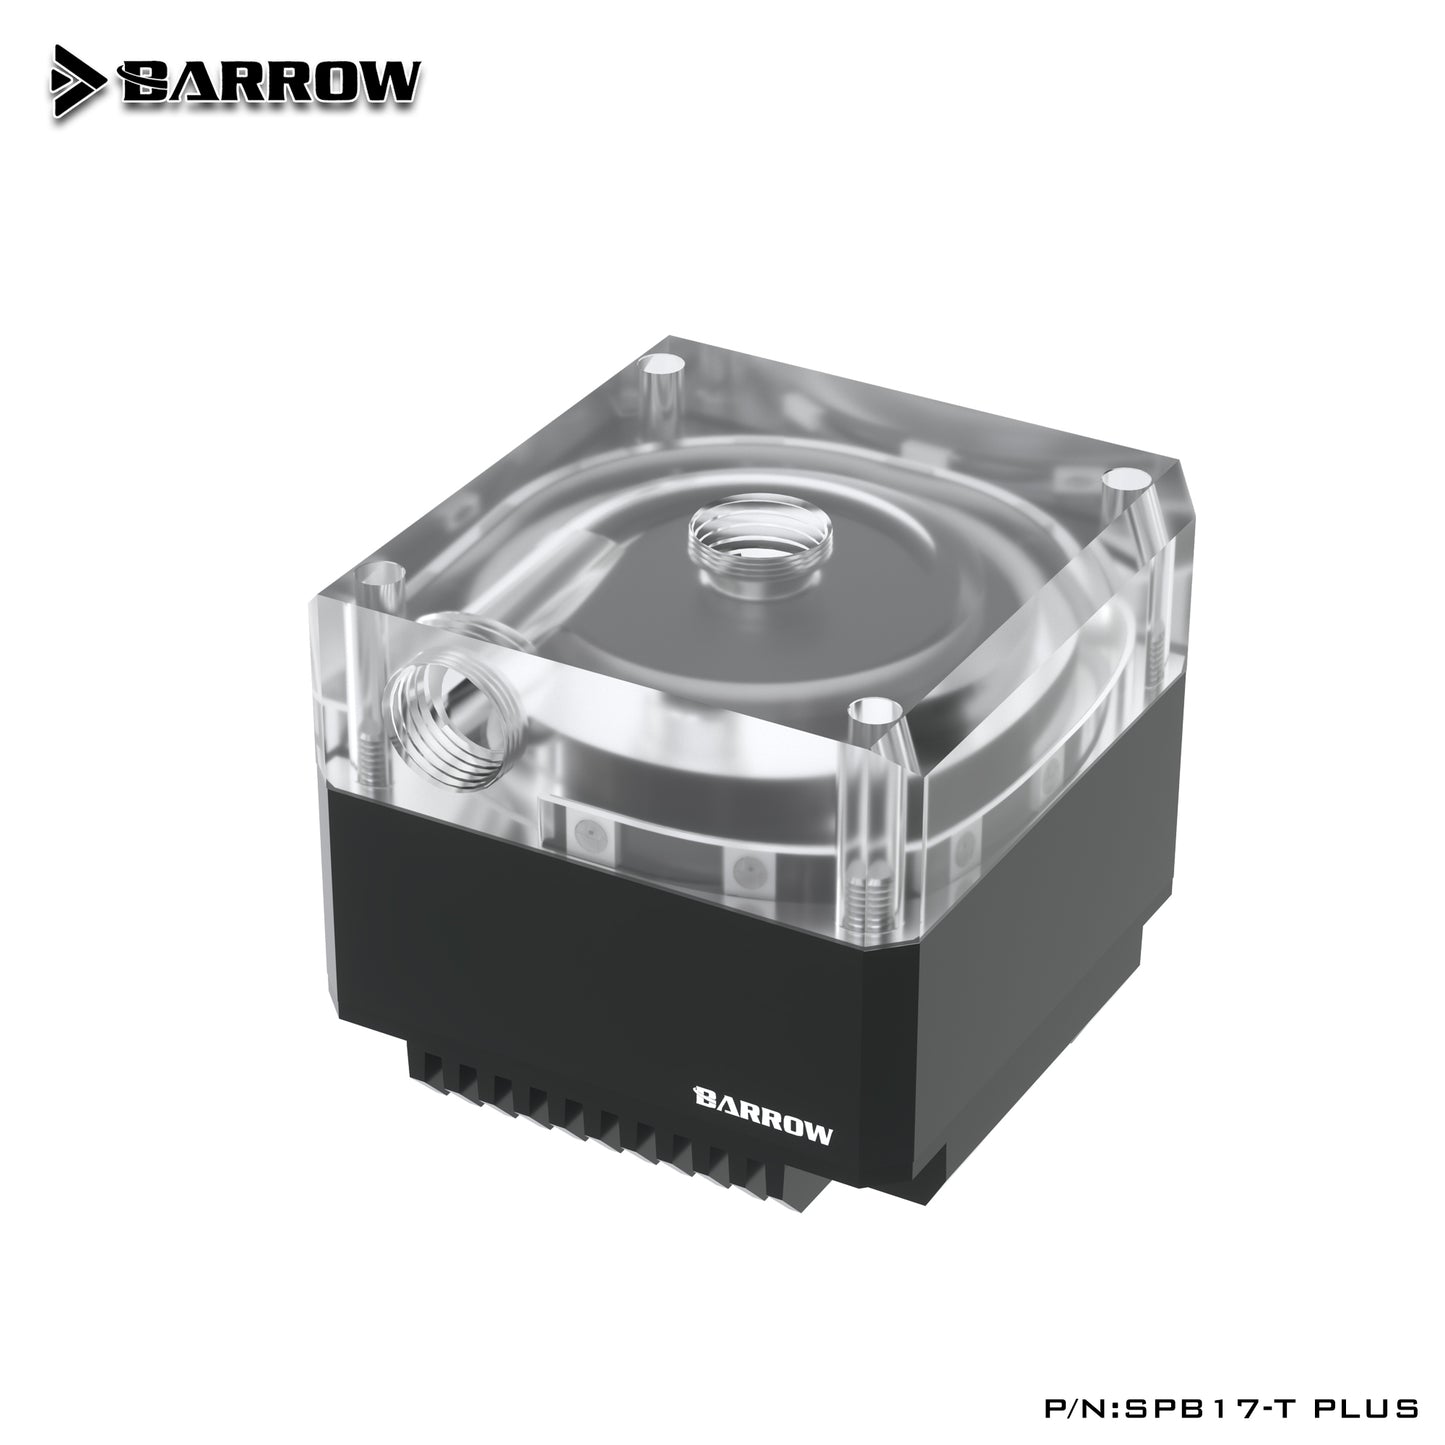 Barrow PLUS Version 17W PWM Pump, With Aluminum Radiator Cover, Special For Barrow Distro Plate, SPB17-T PLUS